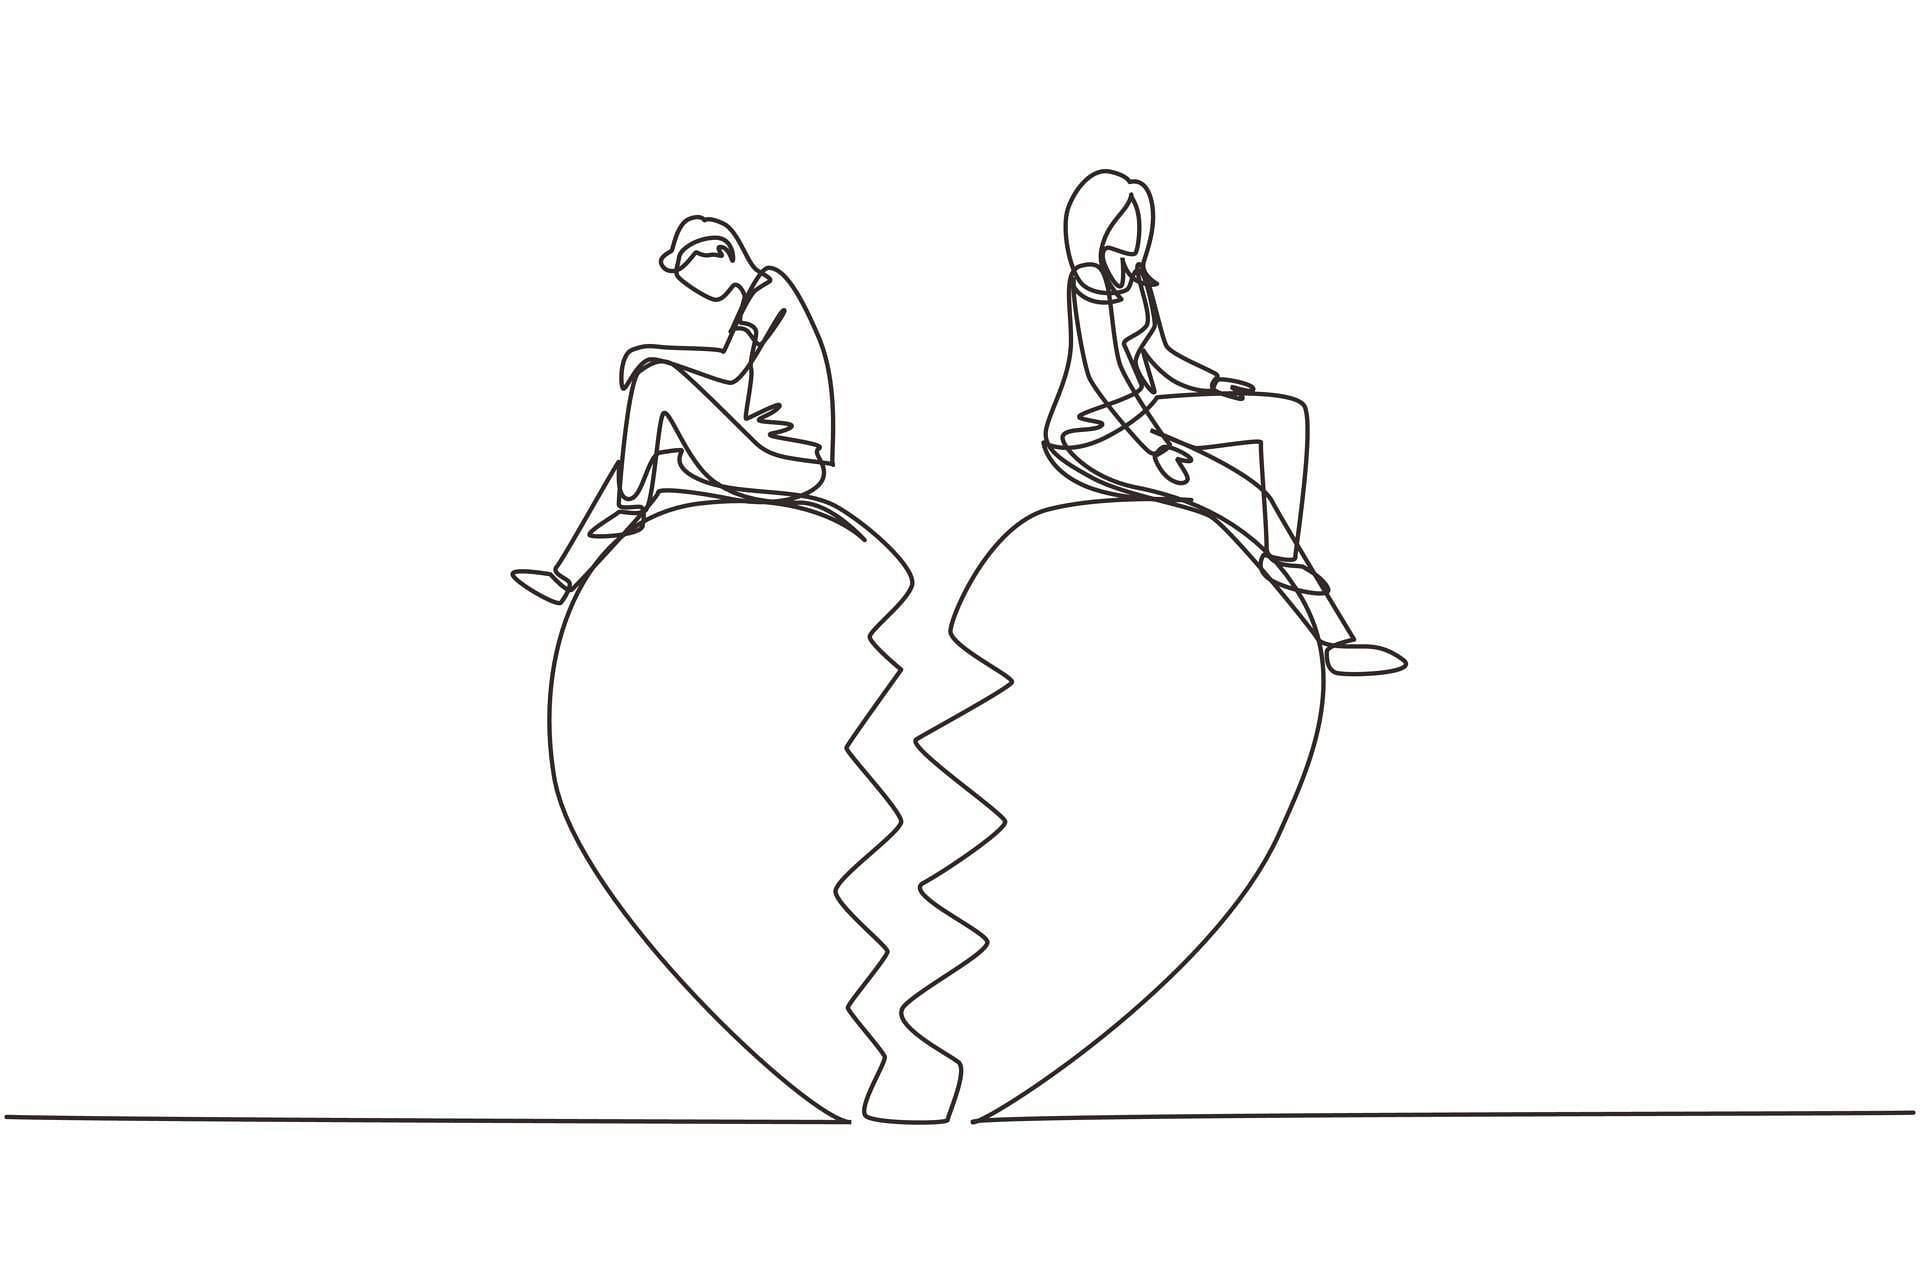 Is there a best way of healing from a breakup? (Image via Vecteezy/ Simpleline)